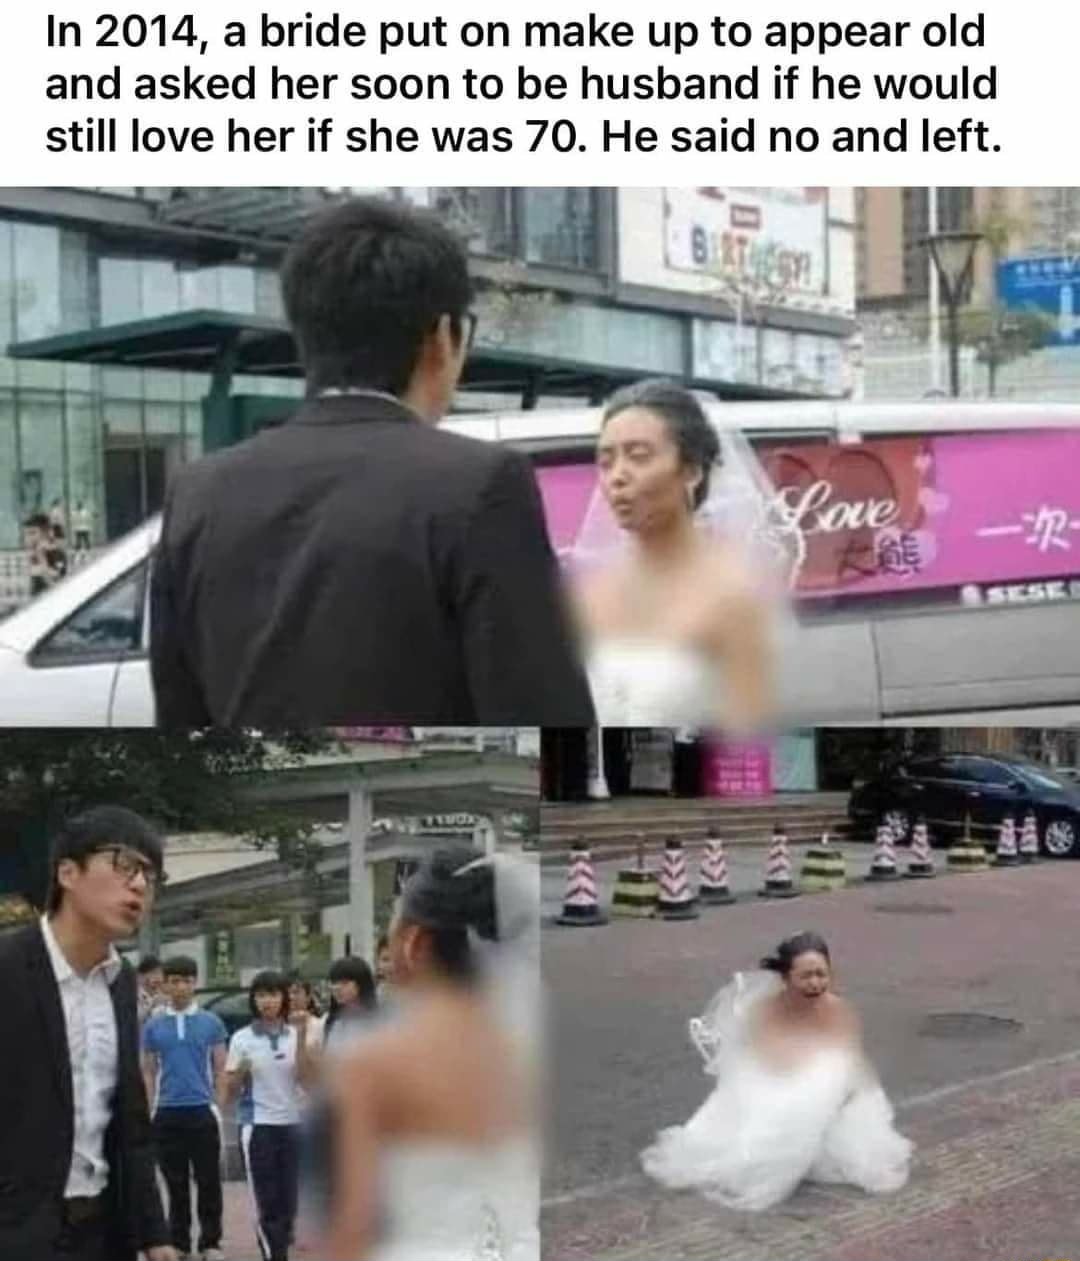 funny pics and memes - Bride - In 2014, a bride put on make up to appear old and asked her soon to be husband if he would still love her if she was 70. He said no and left. Love Two